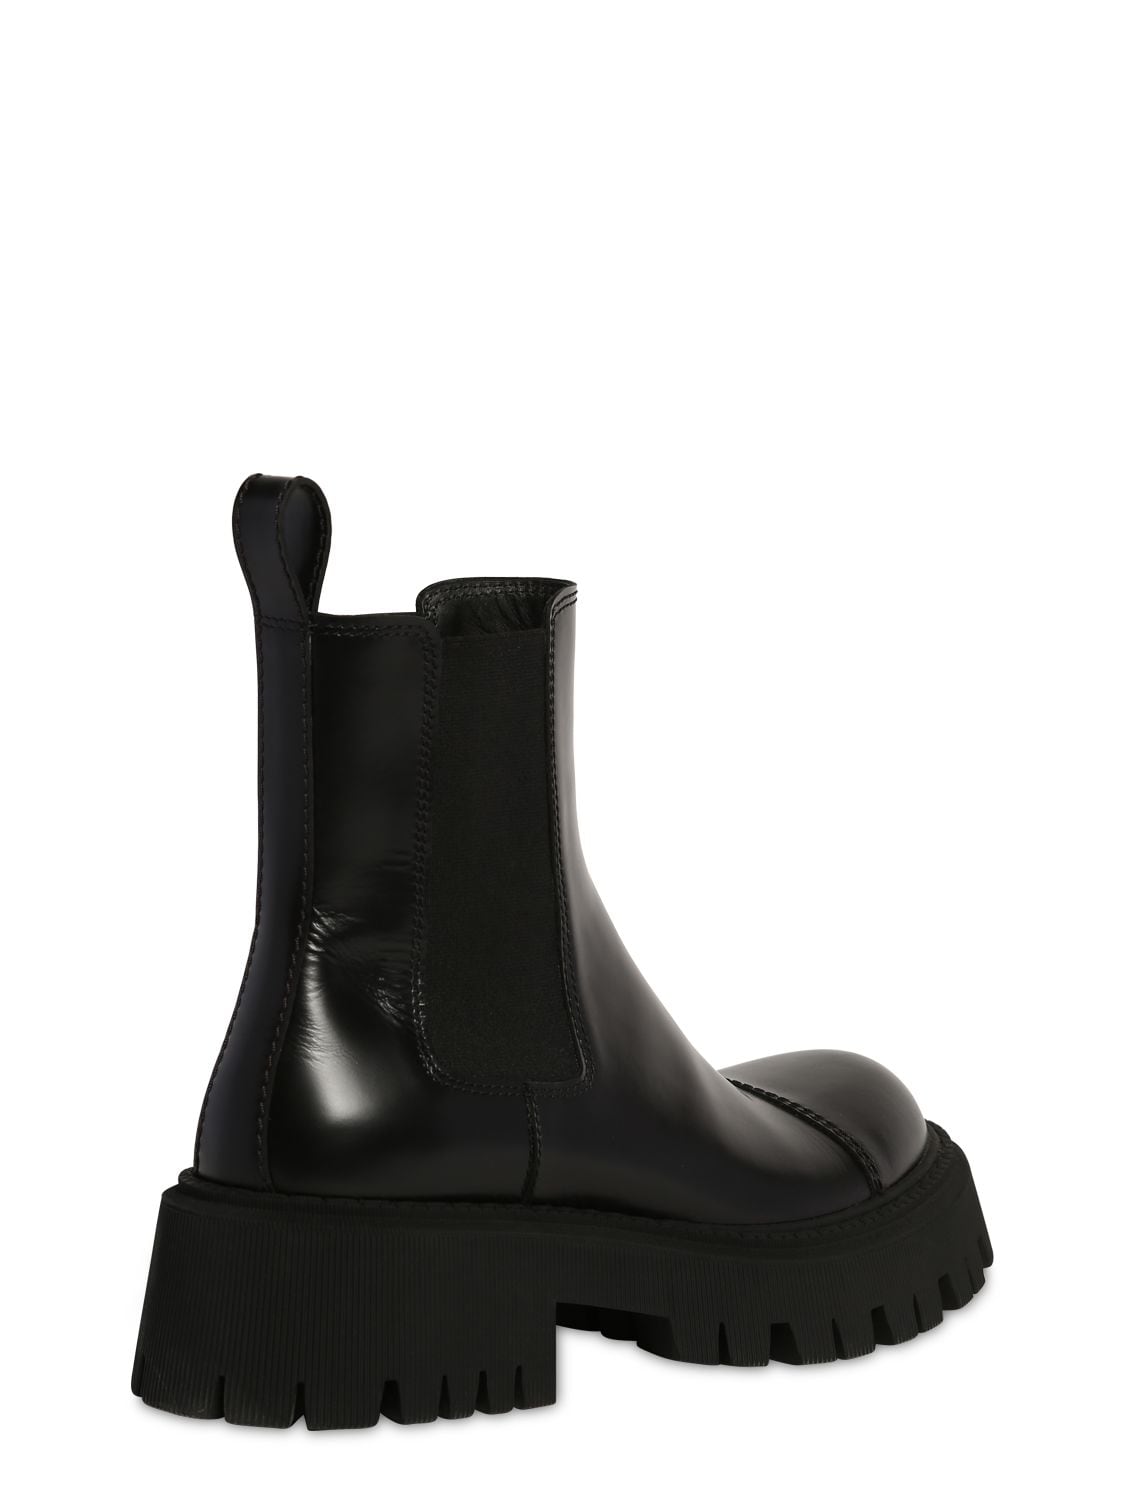 Balenciaga Tractor Bootie L20 Leather Boots In Black | ModeSens